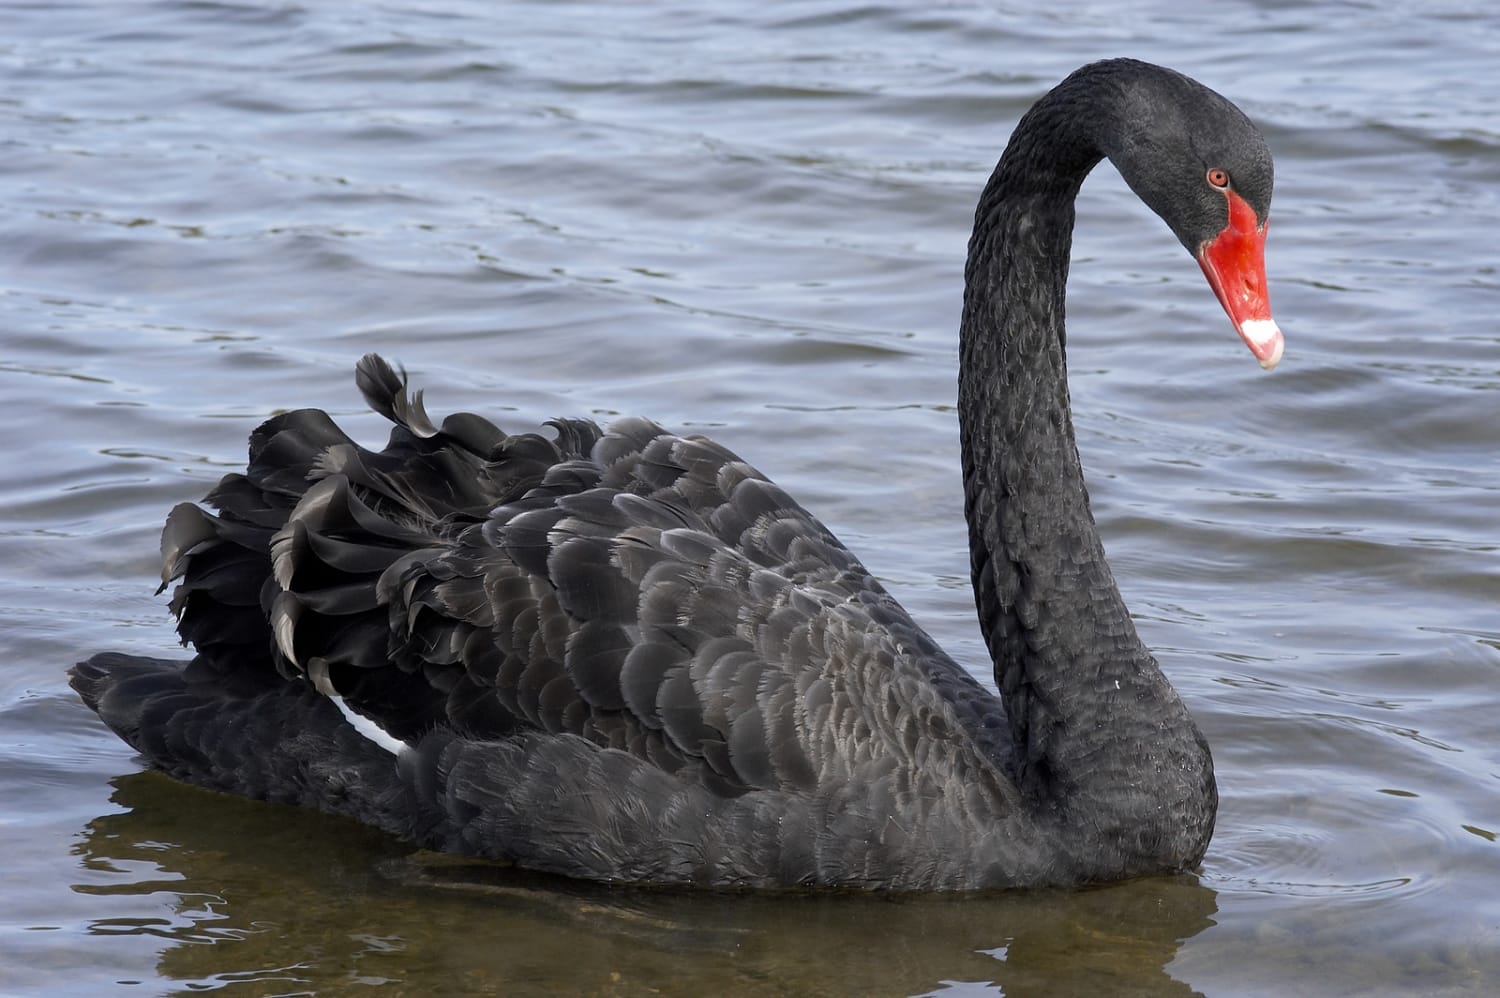 A Flock of Black Swans Comes Home to Roost